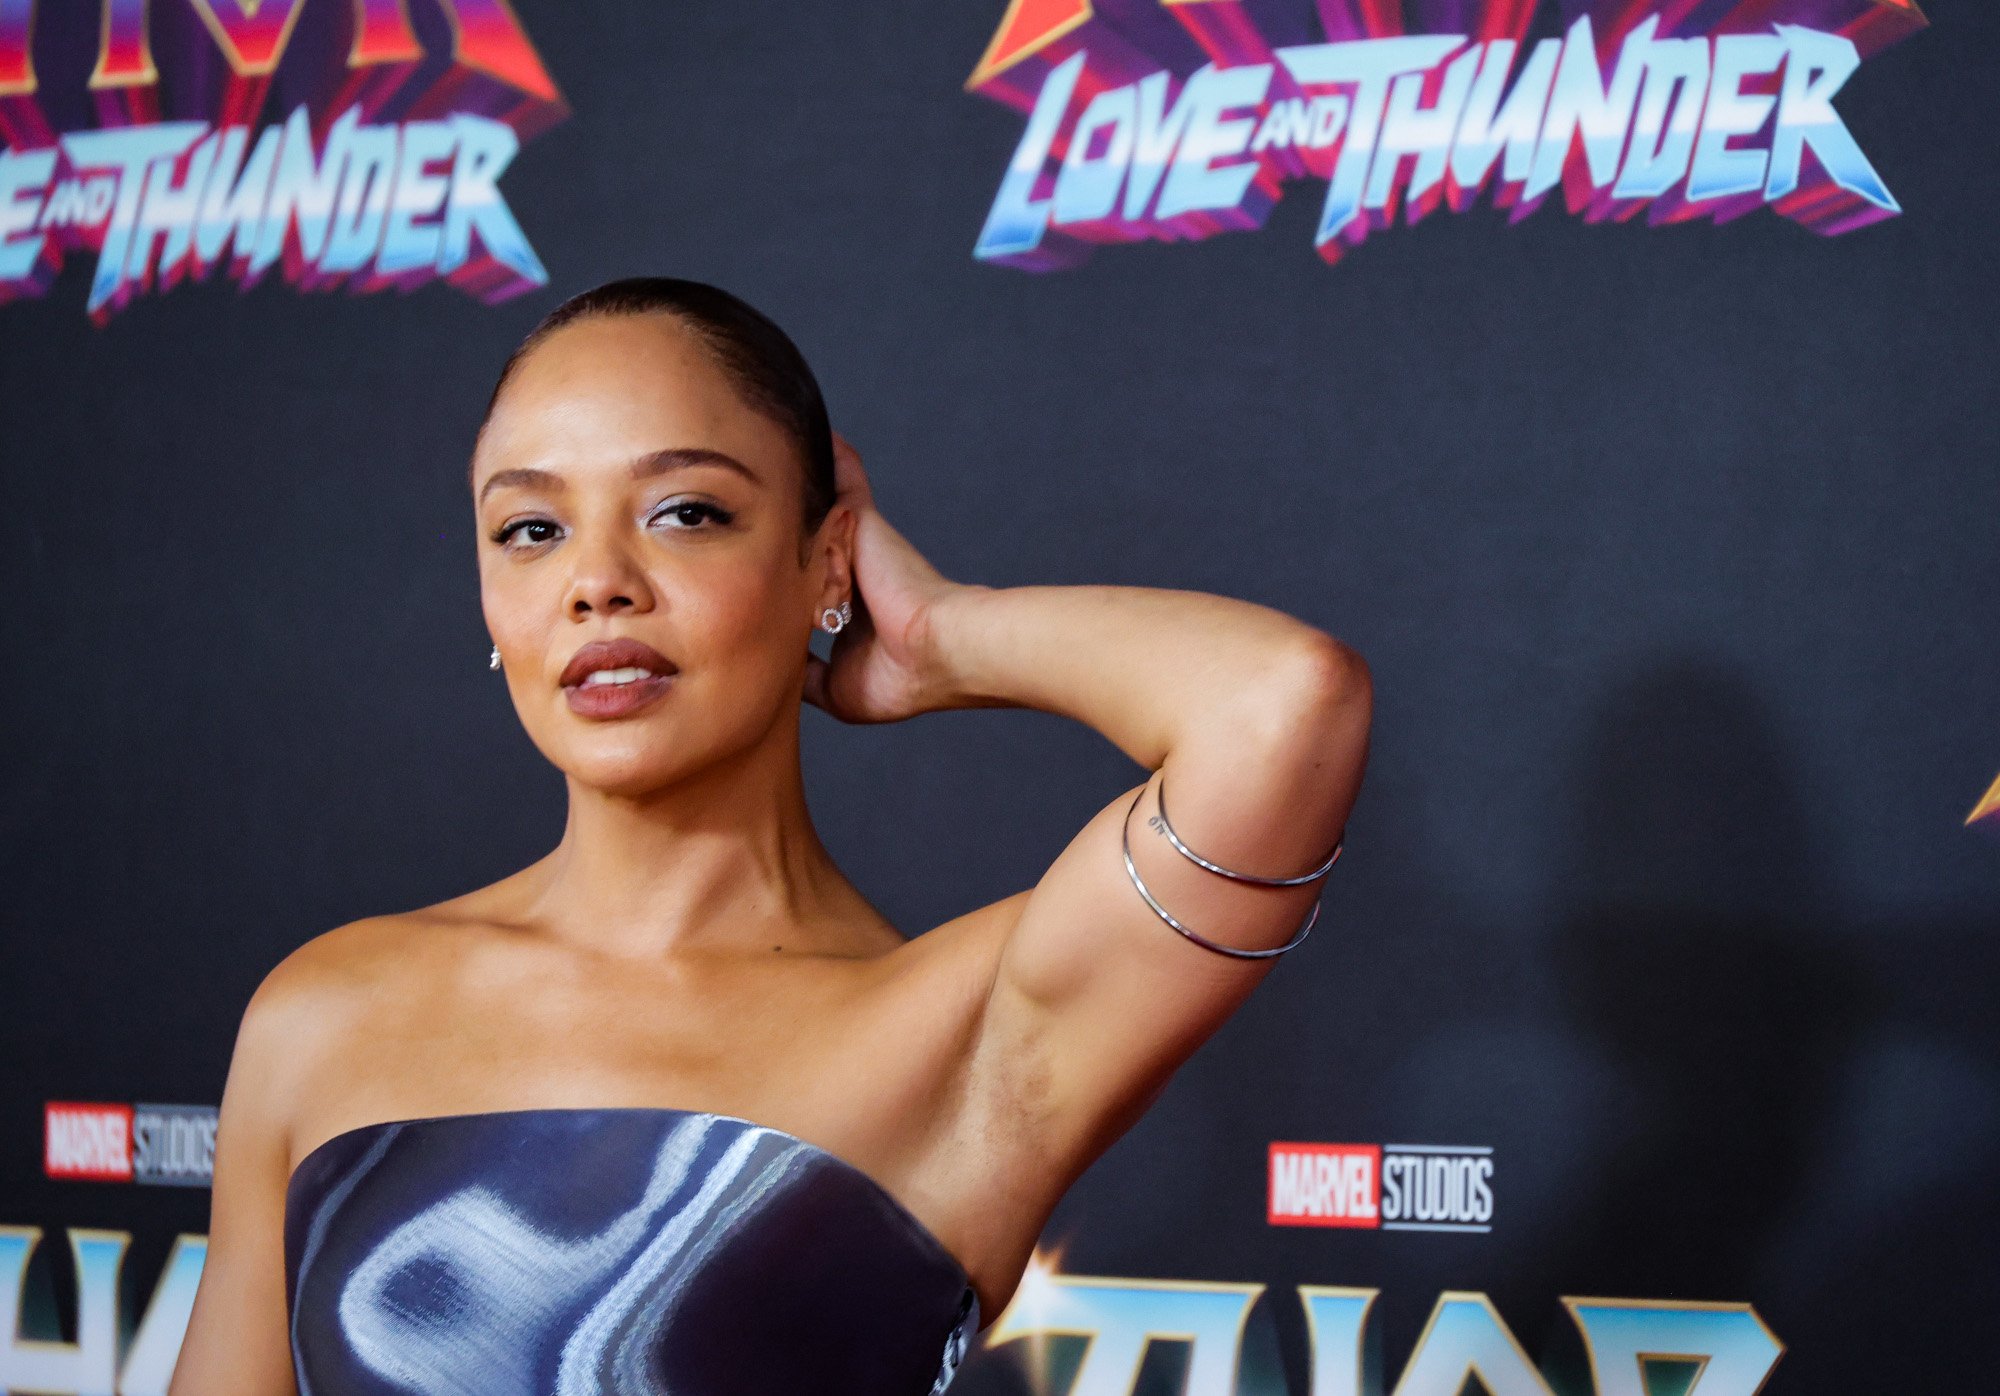 'Thor: Love and Thunder' star Tessa Thompson, who will play Valkyrie as she takes up her title as King of Asgard. She's wearing a dark, metallic dress and holding her hand up to her head.